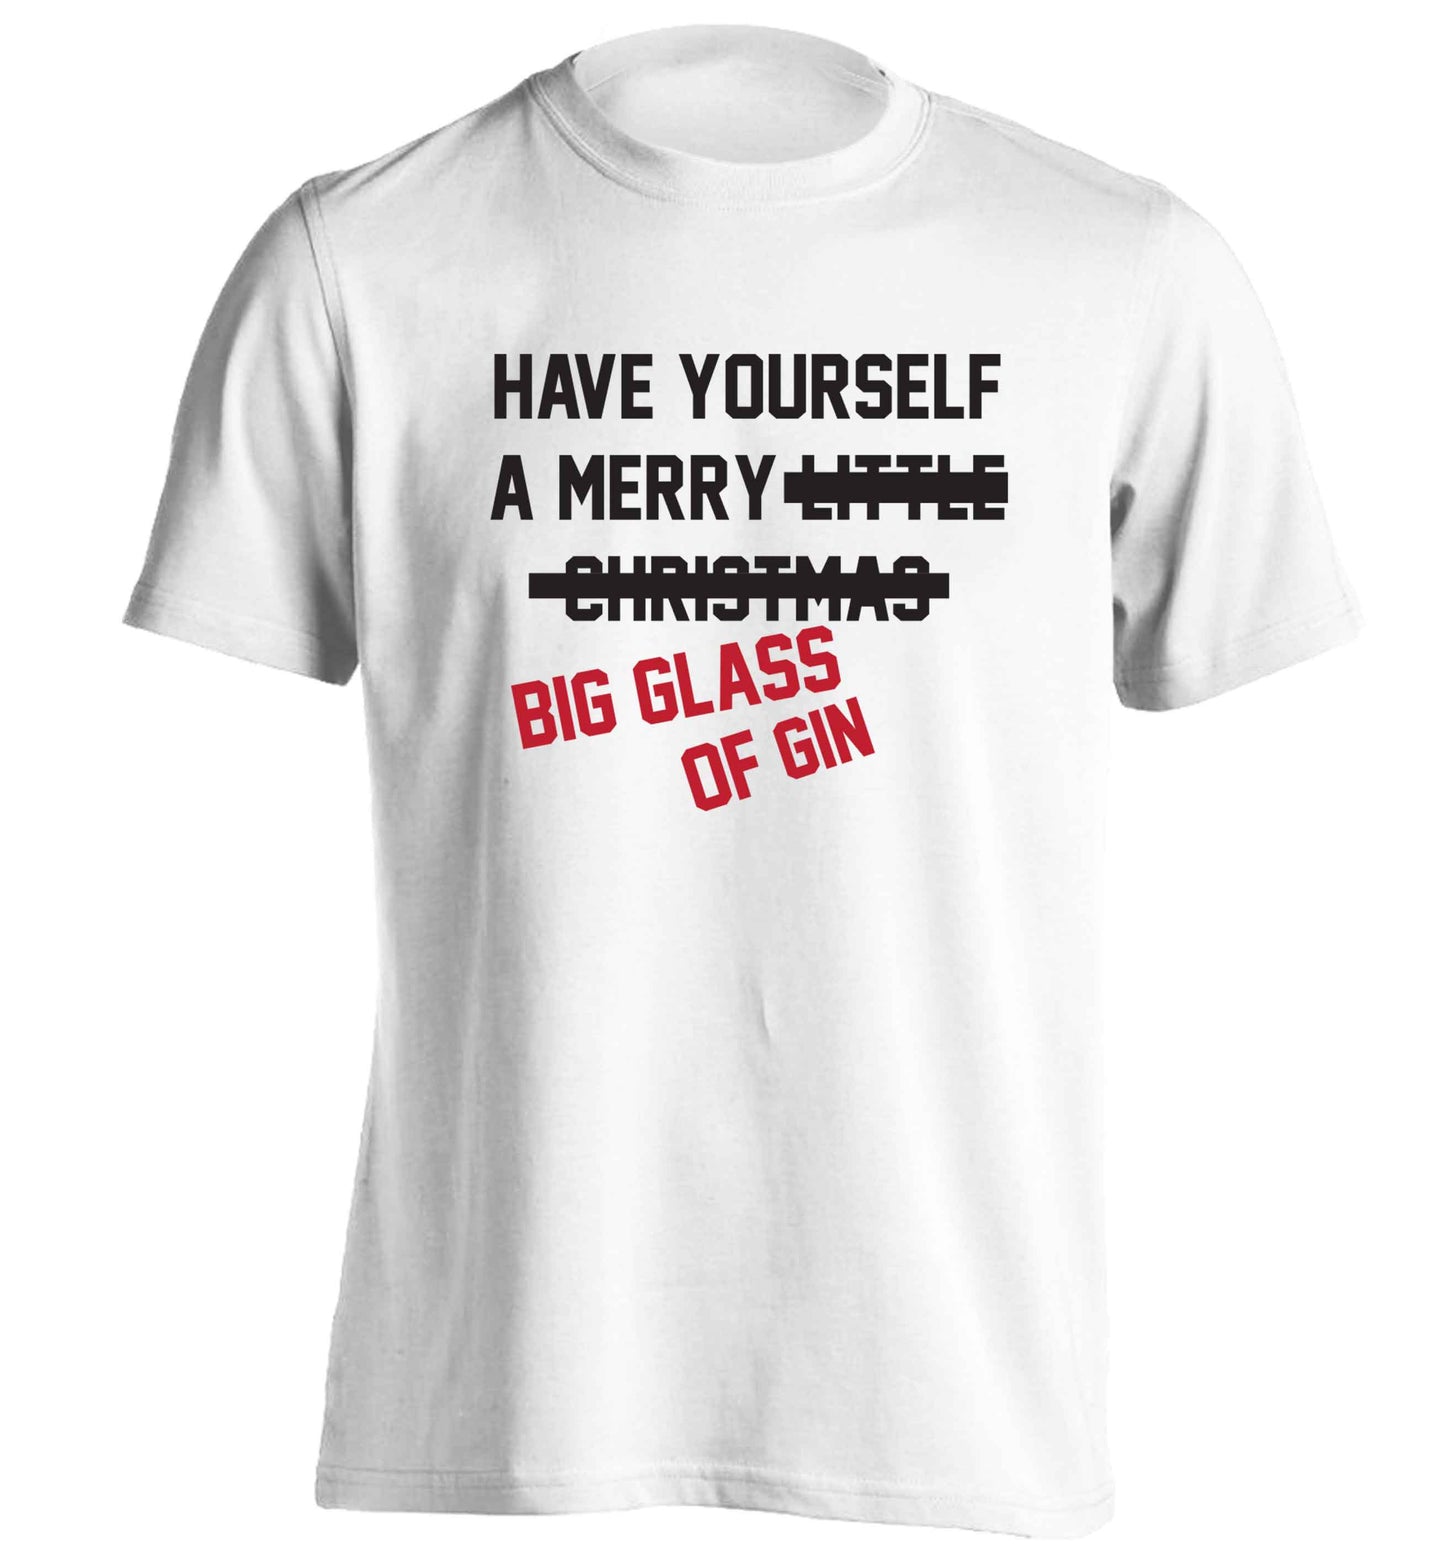 Have yourself a merry big glass of gin adults unisex white Tshirt 2XL